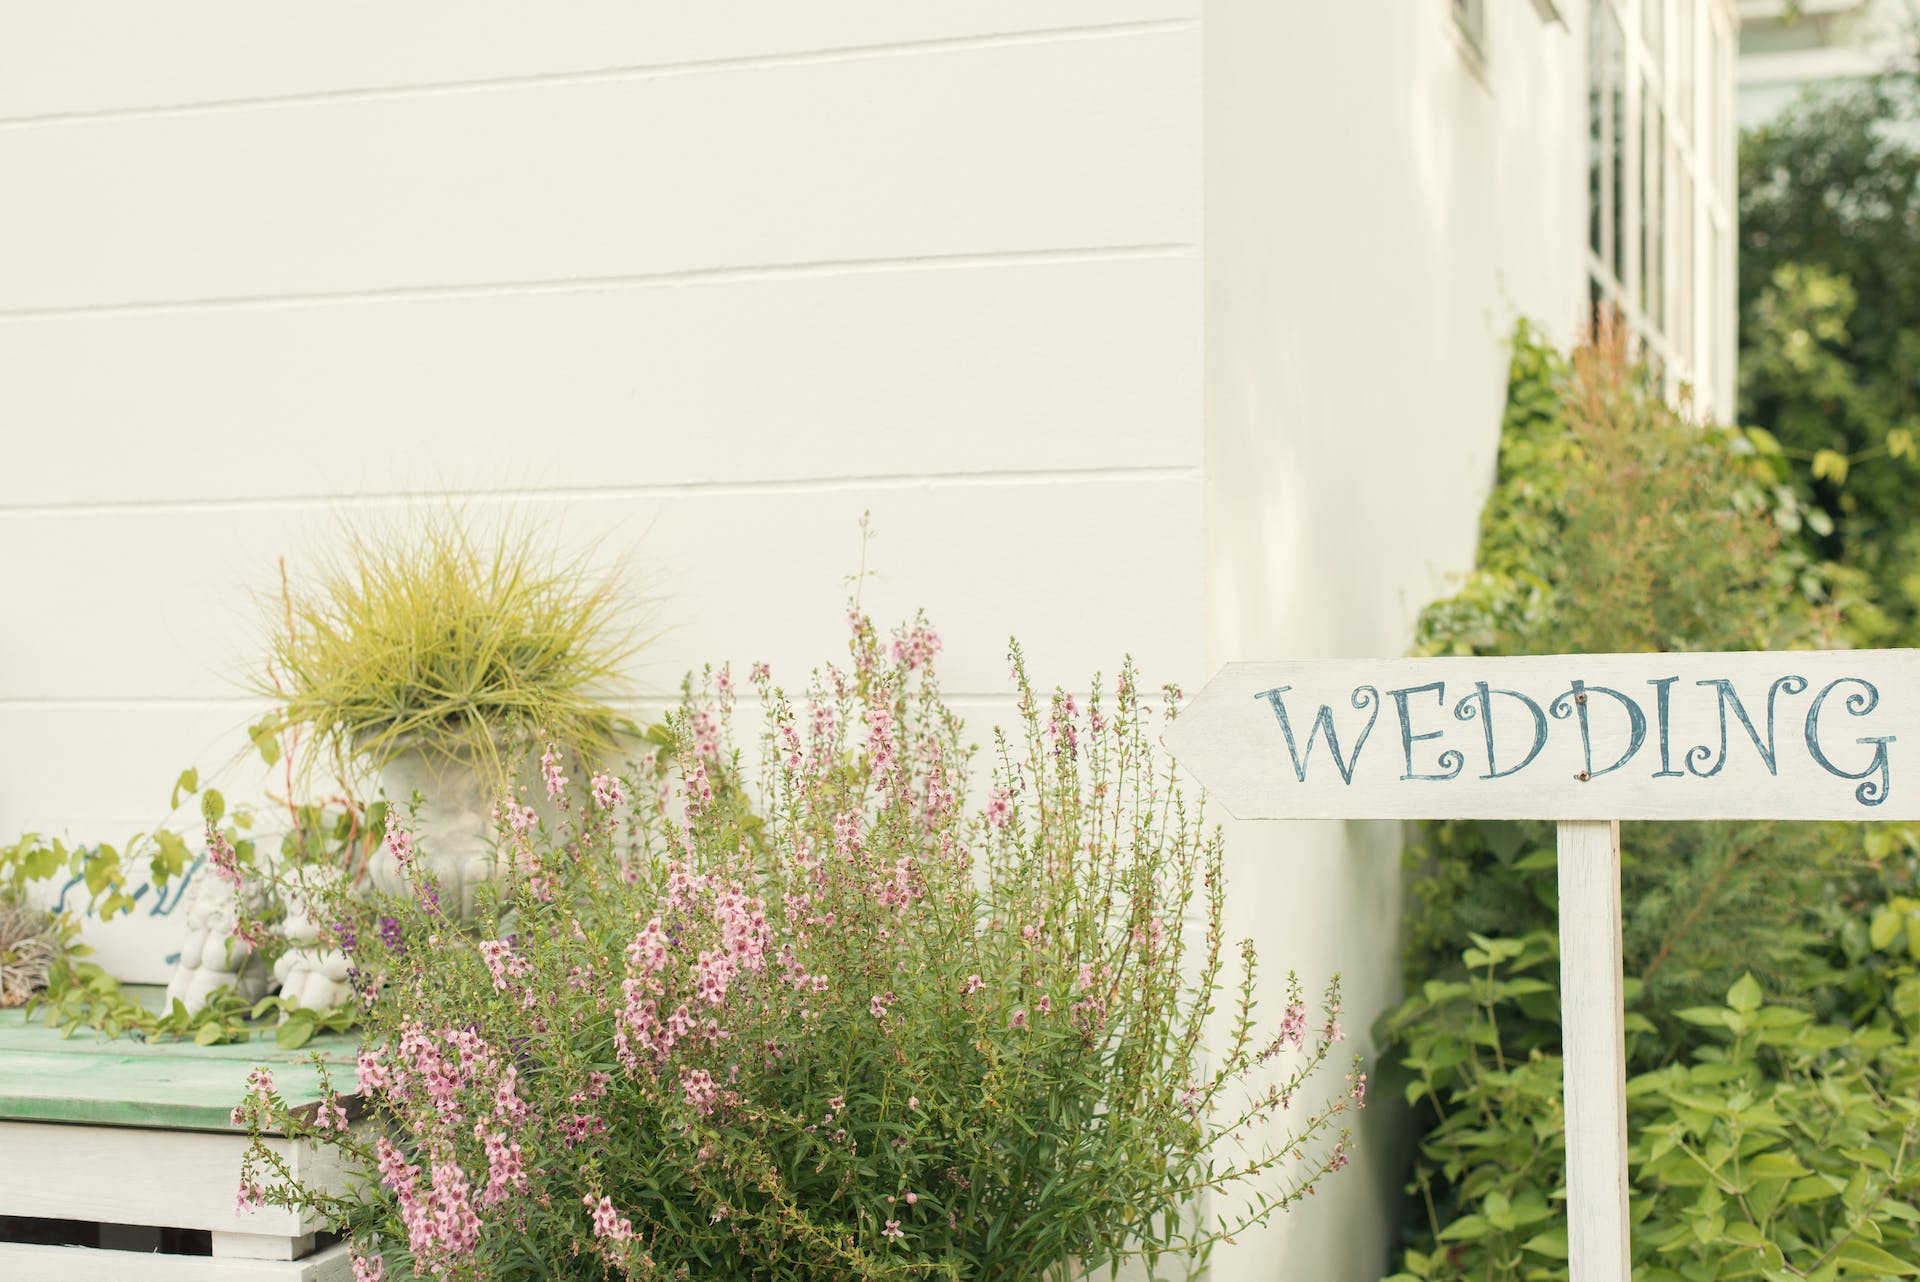 Wedding sign with plants | Source: Pexels